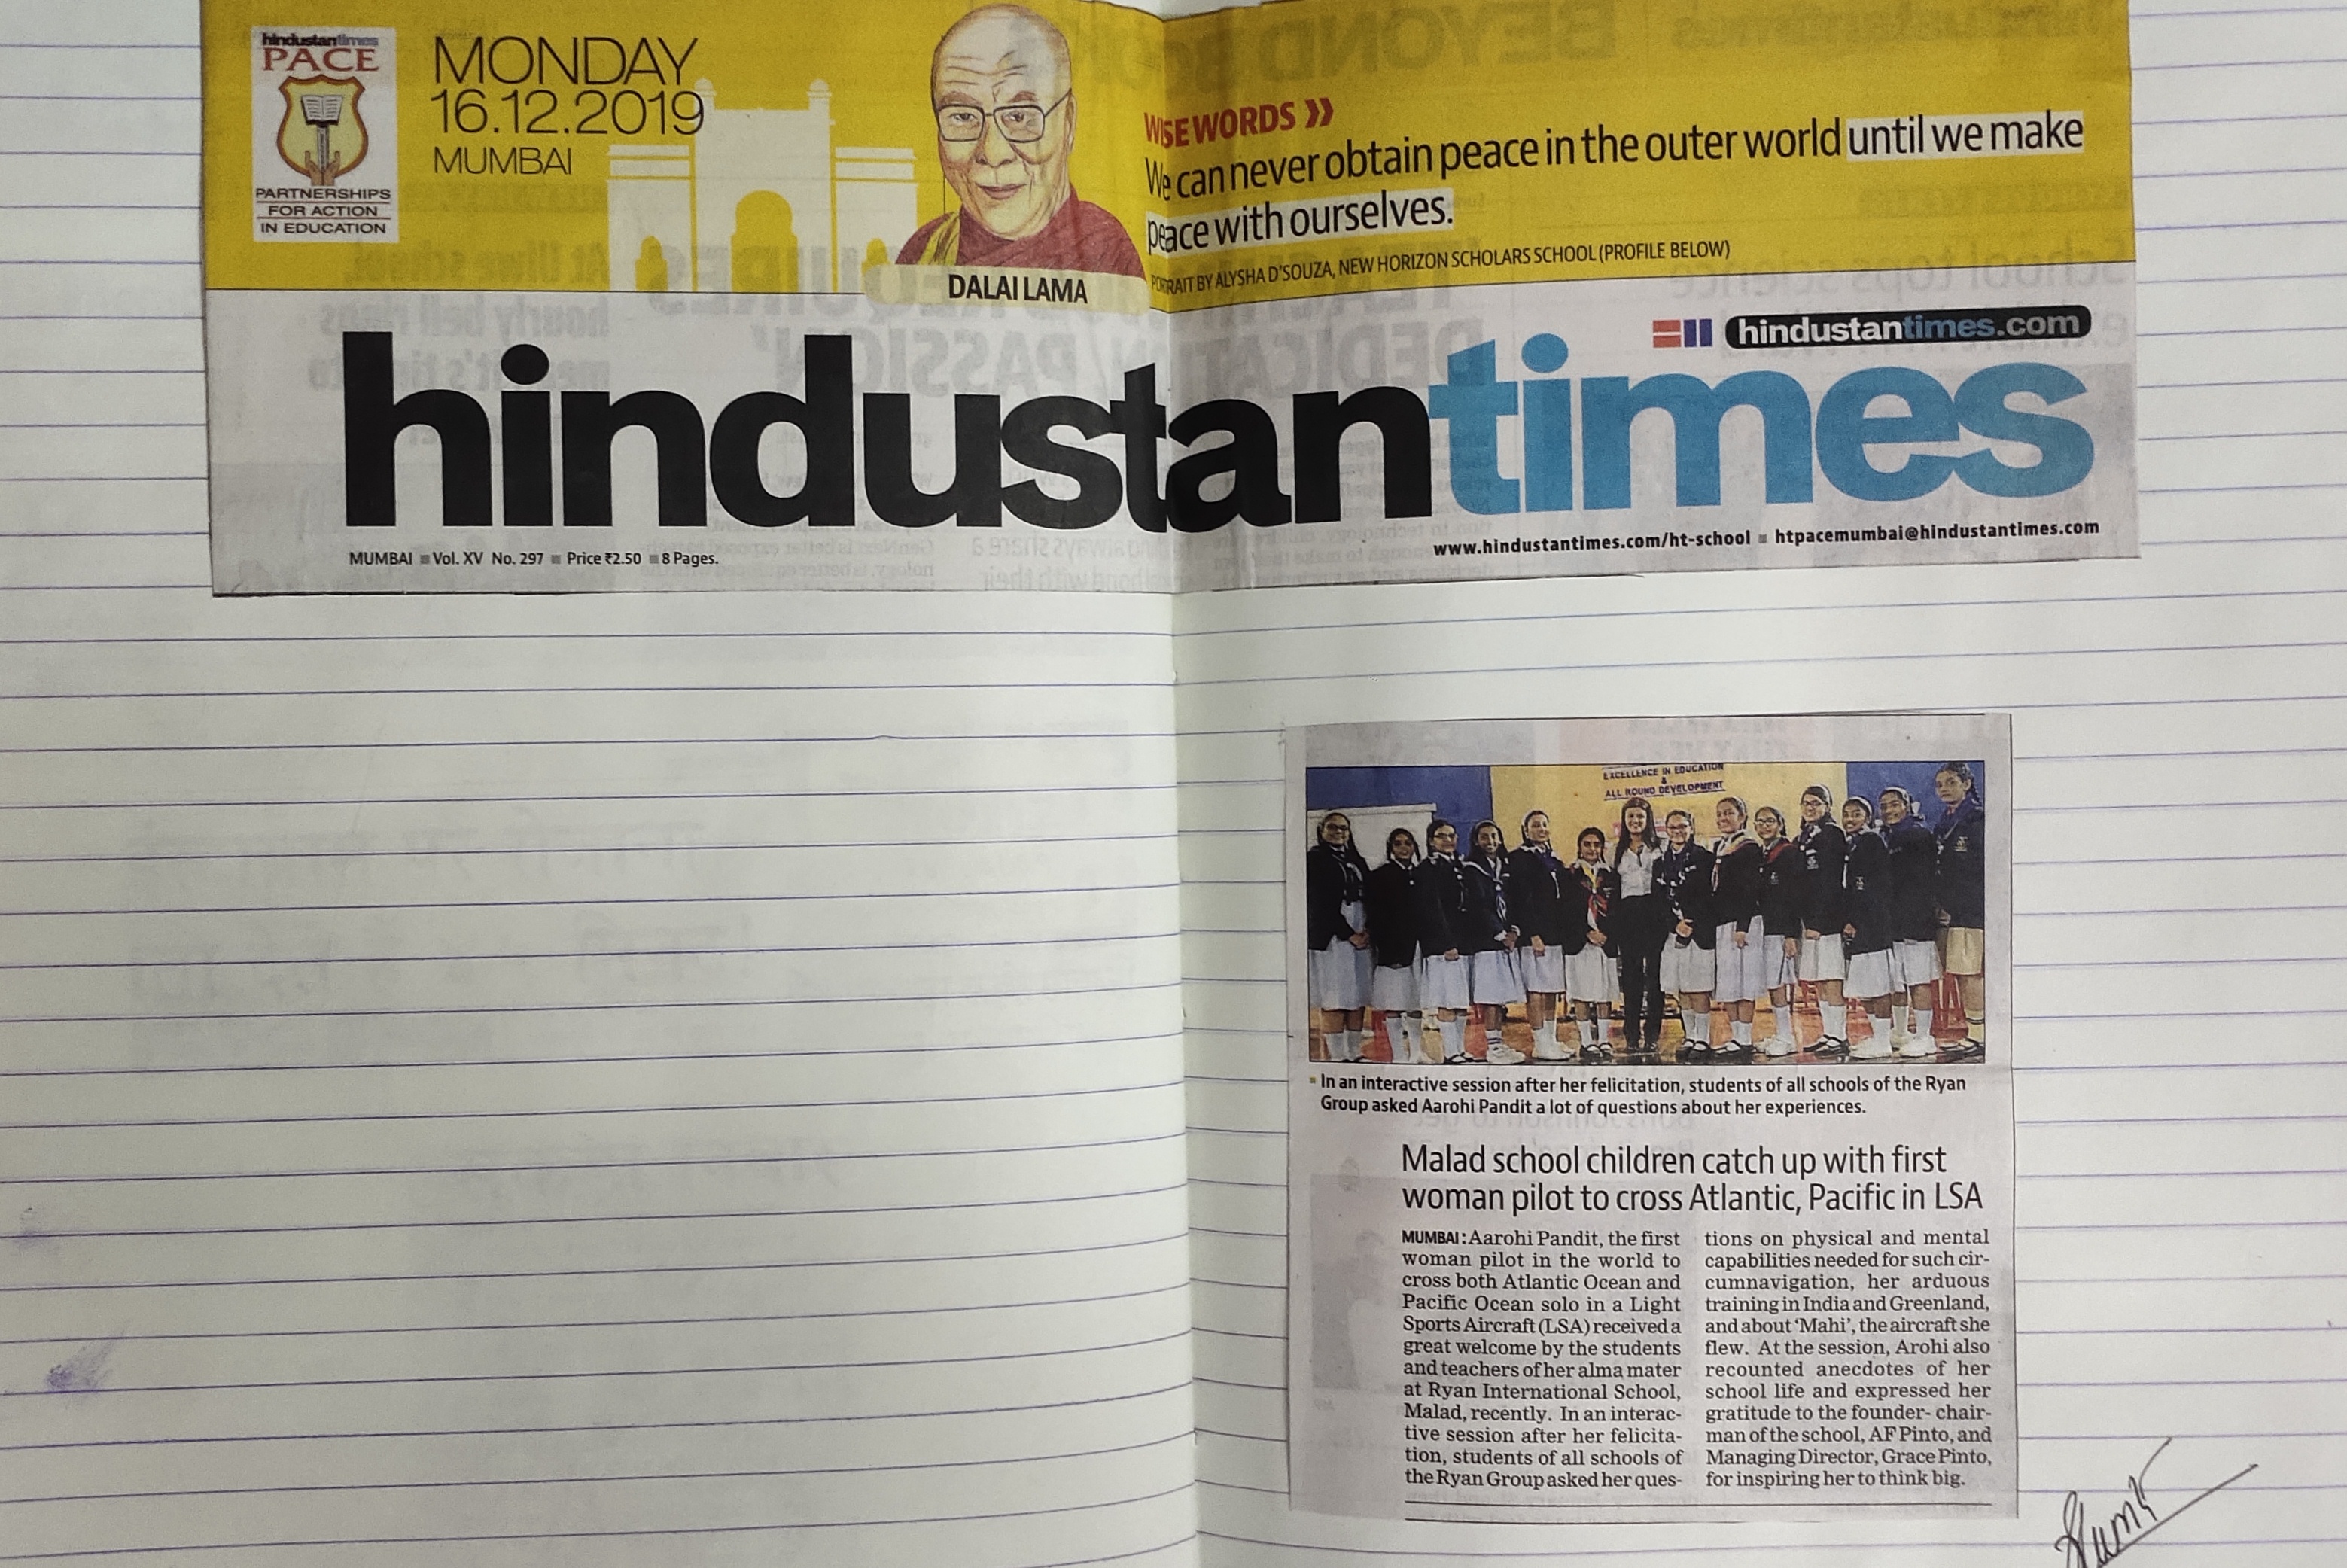 An article under the name “Interactive session with Ms. Arohi Pandit - First woman pilot” was published in the Hindustan Times